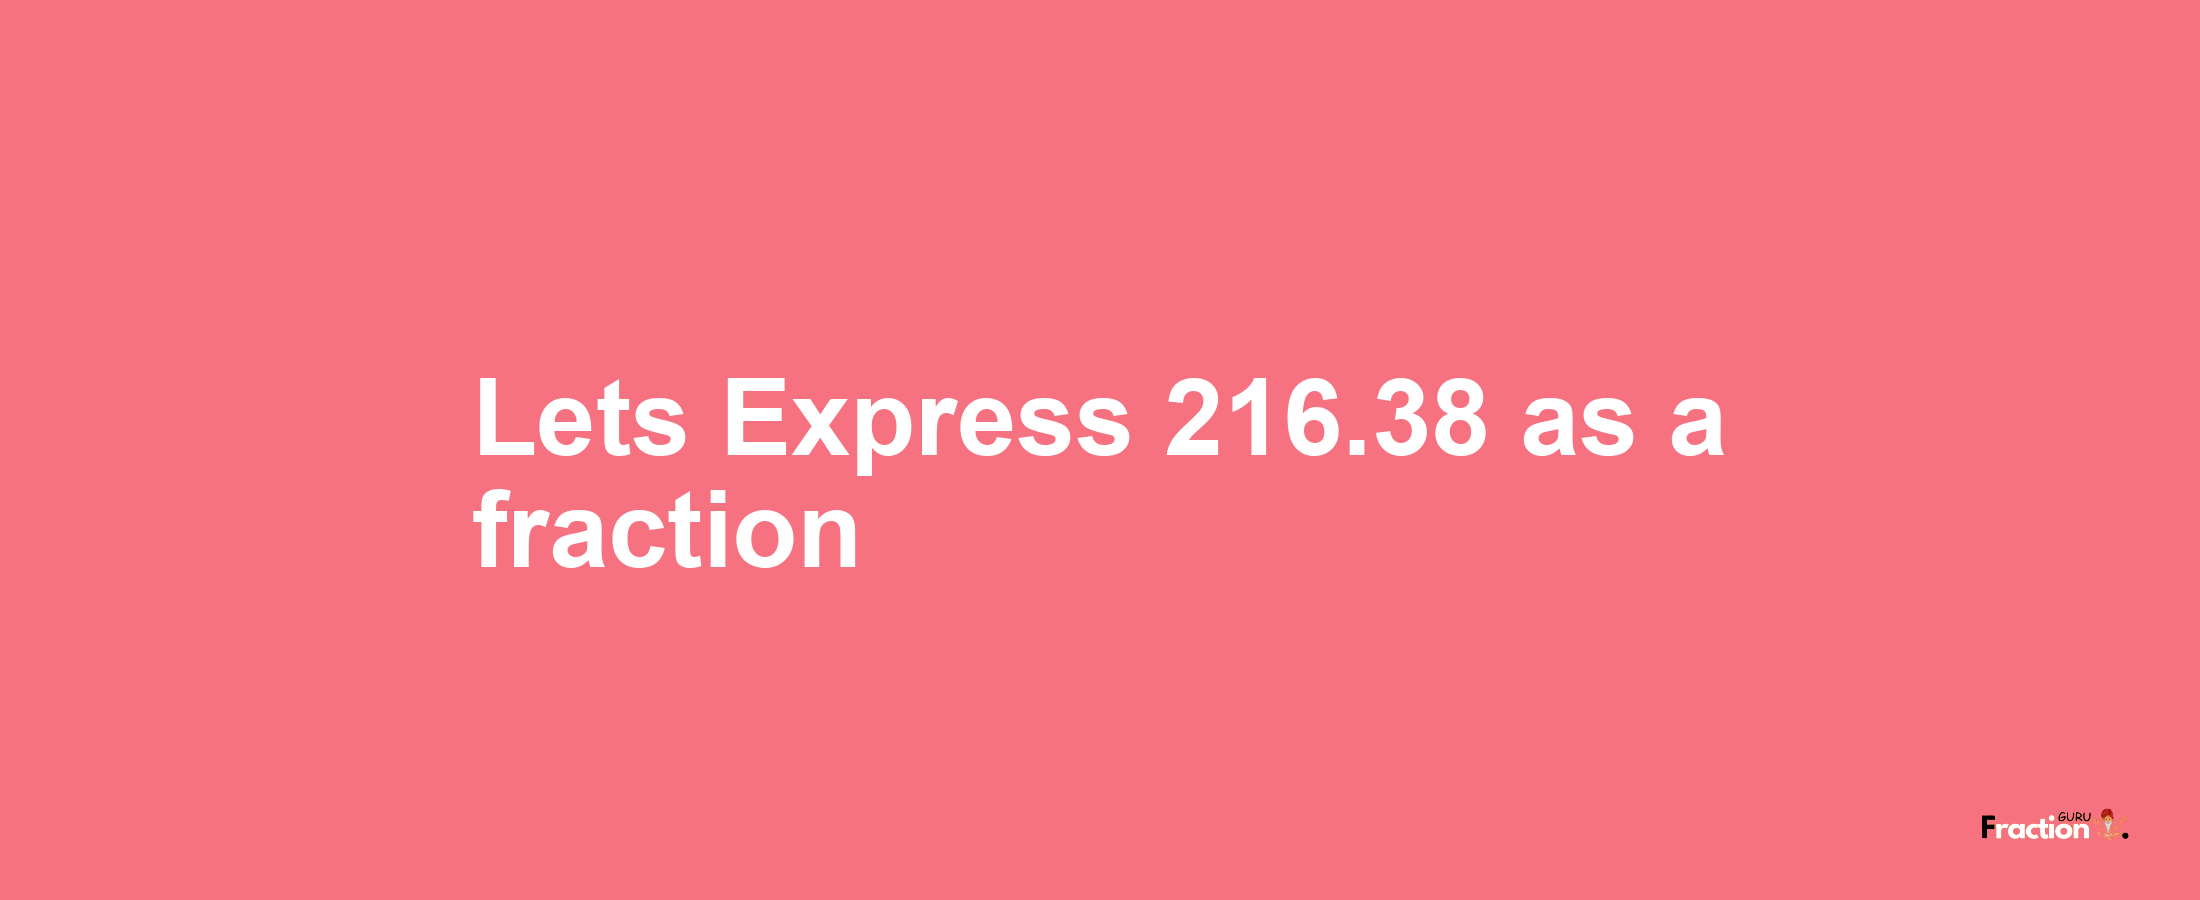 Lets Express 216.38 as afraction